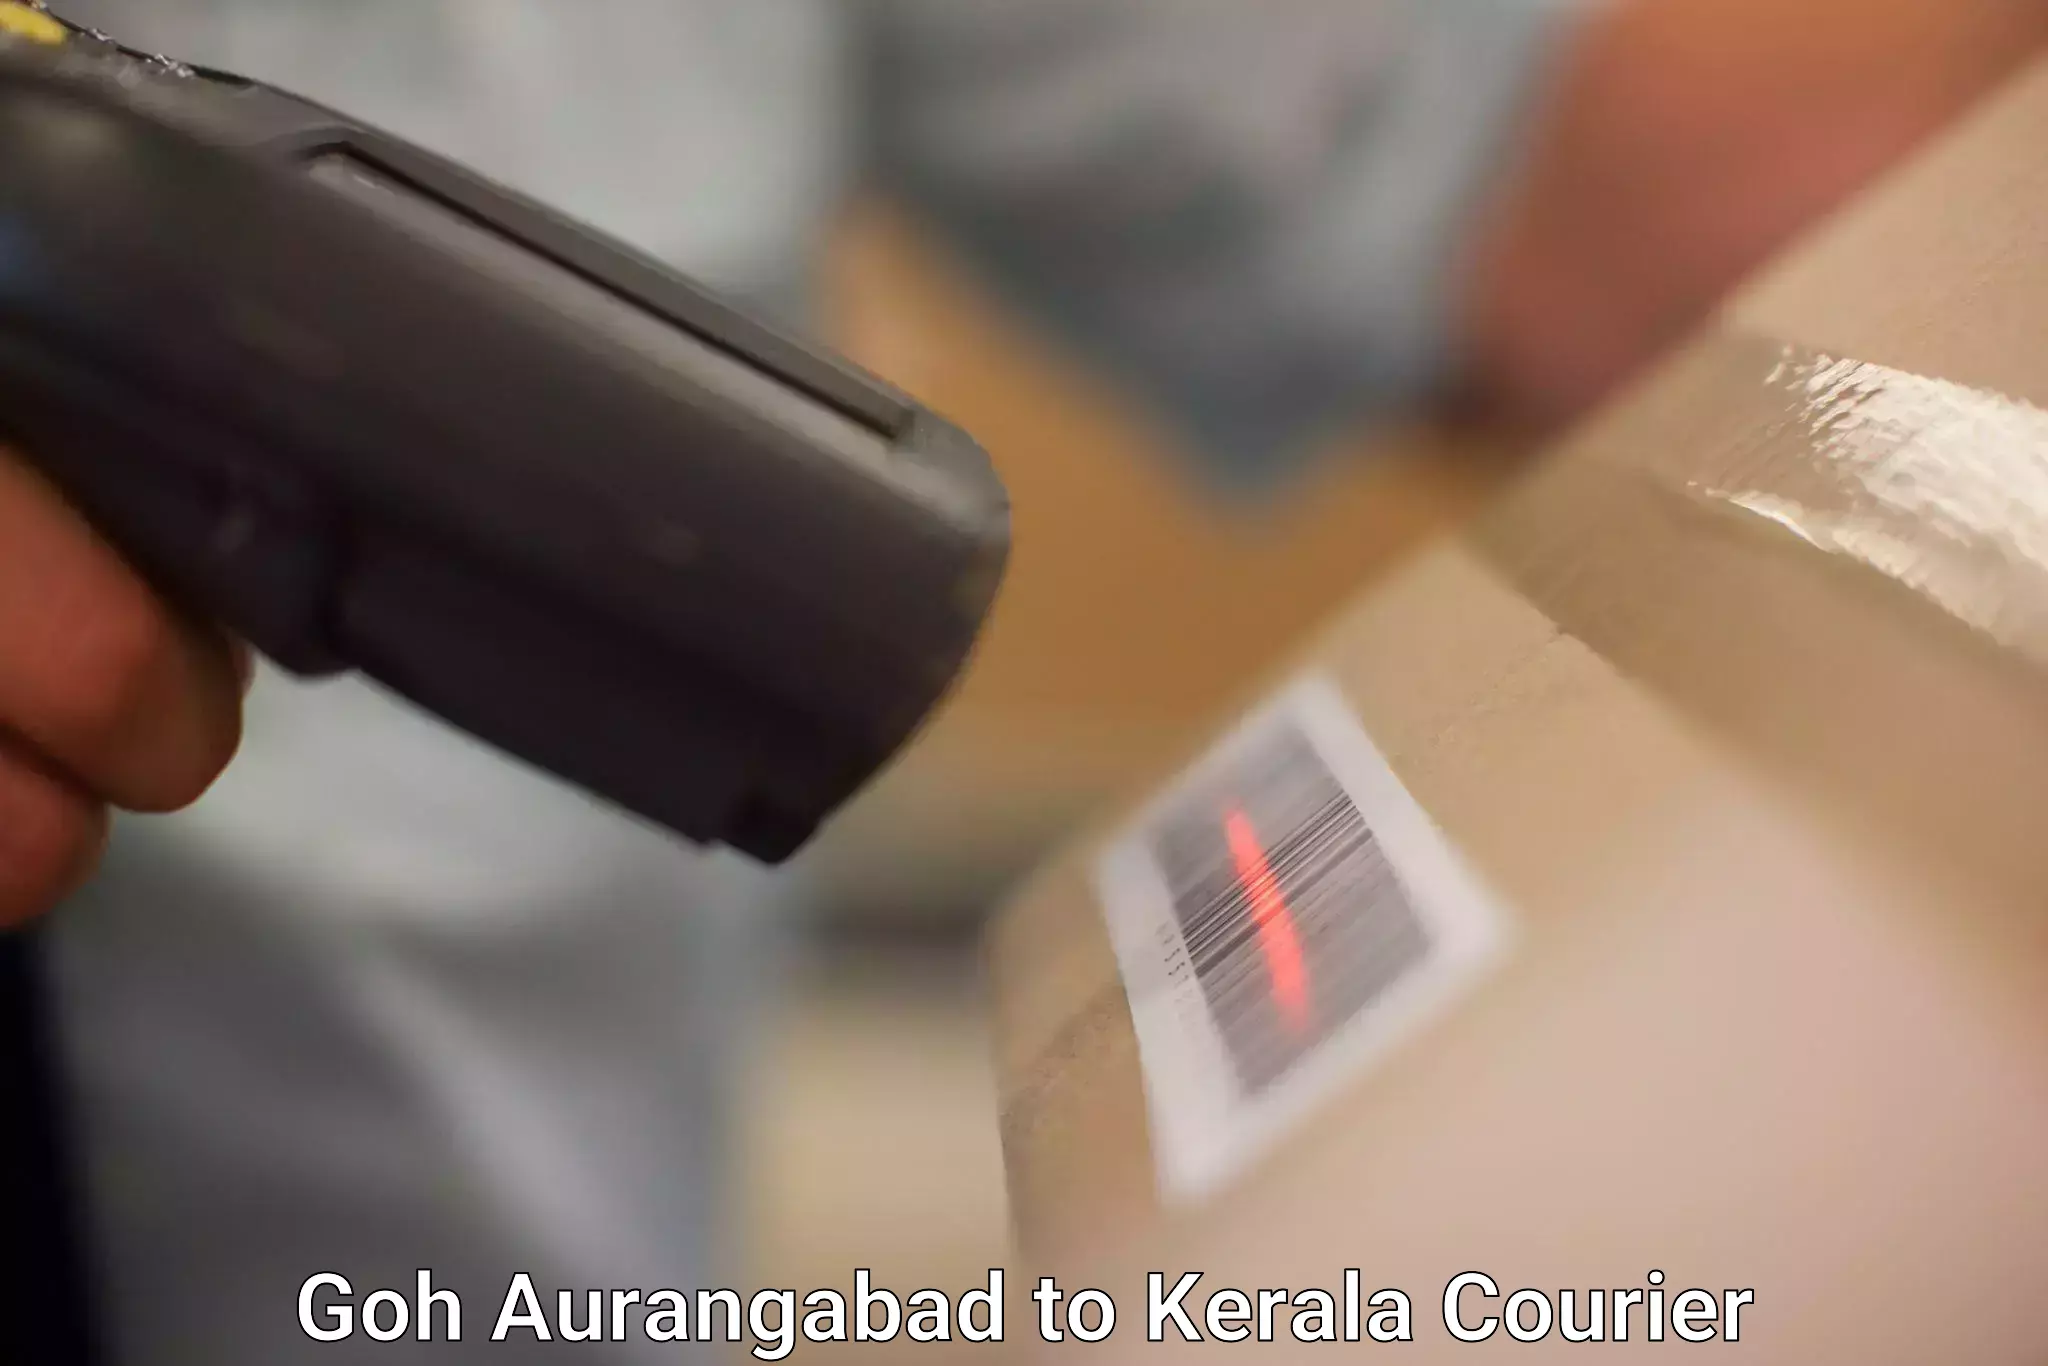 High-speed delivery Goh Aurangabad to Cochin University of Science and Technology